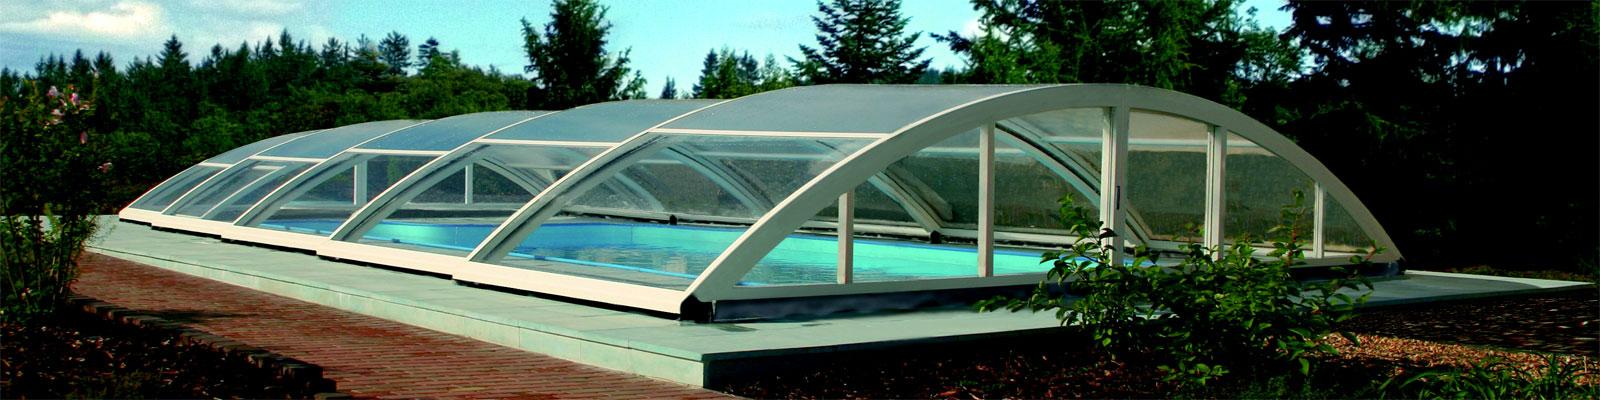 Poolcover-polycarbonate1